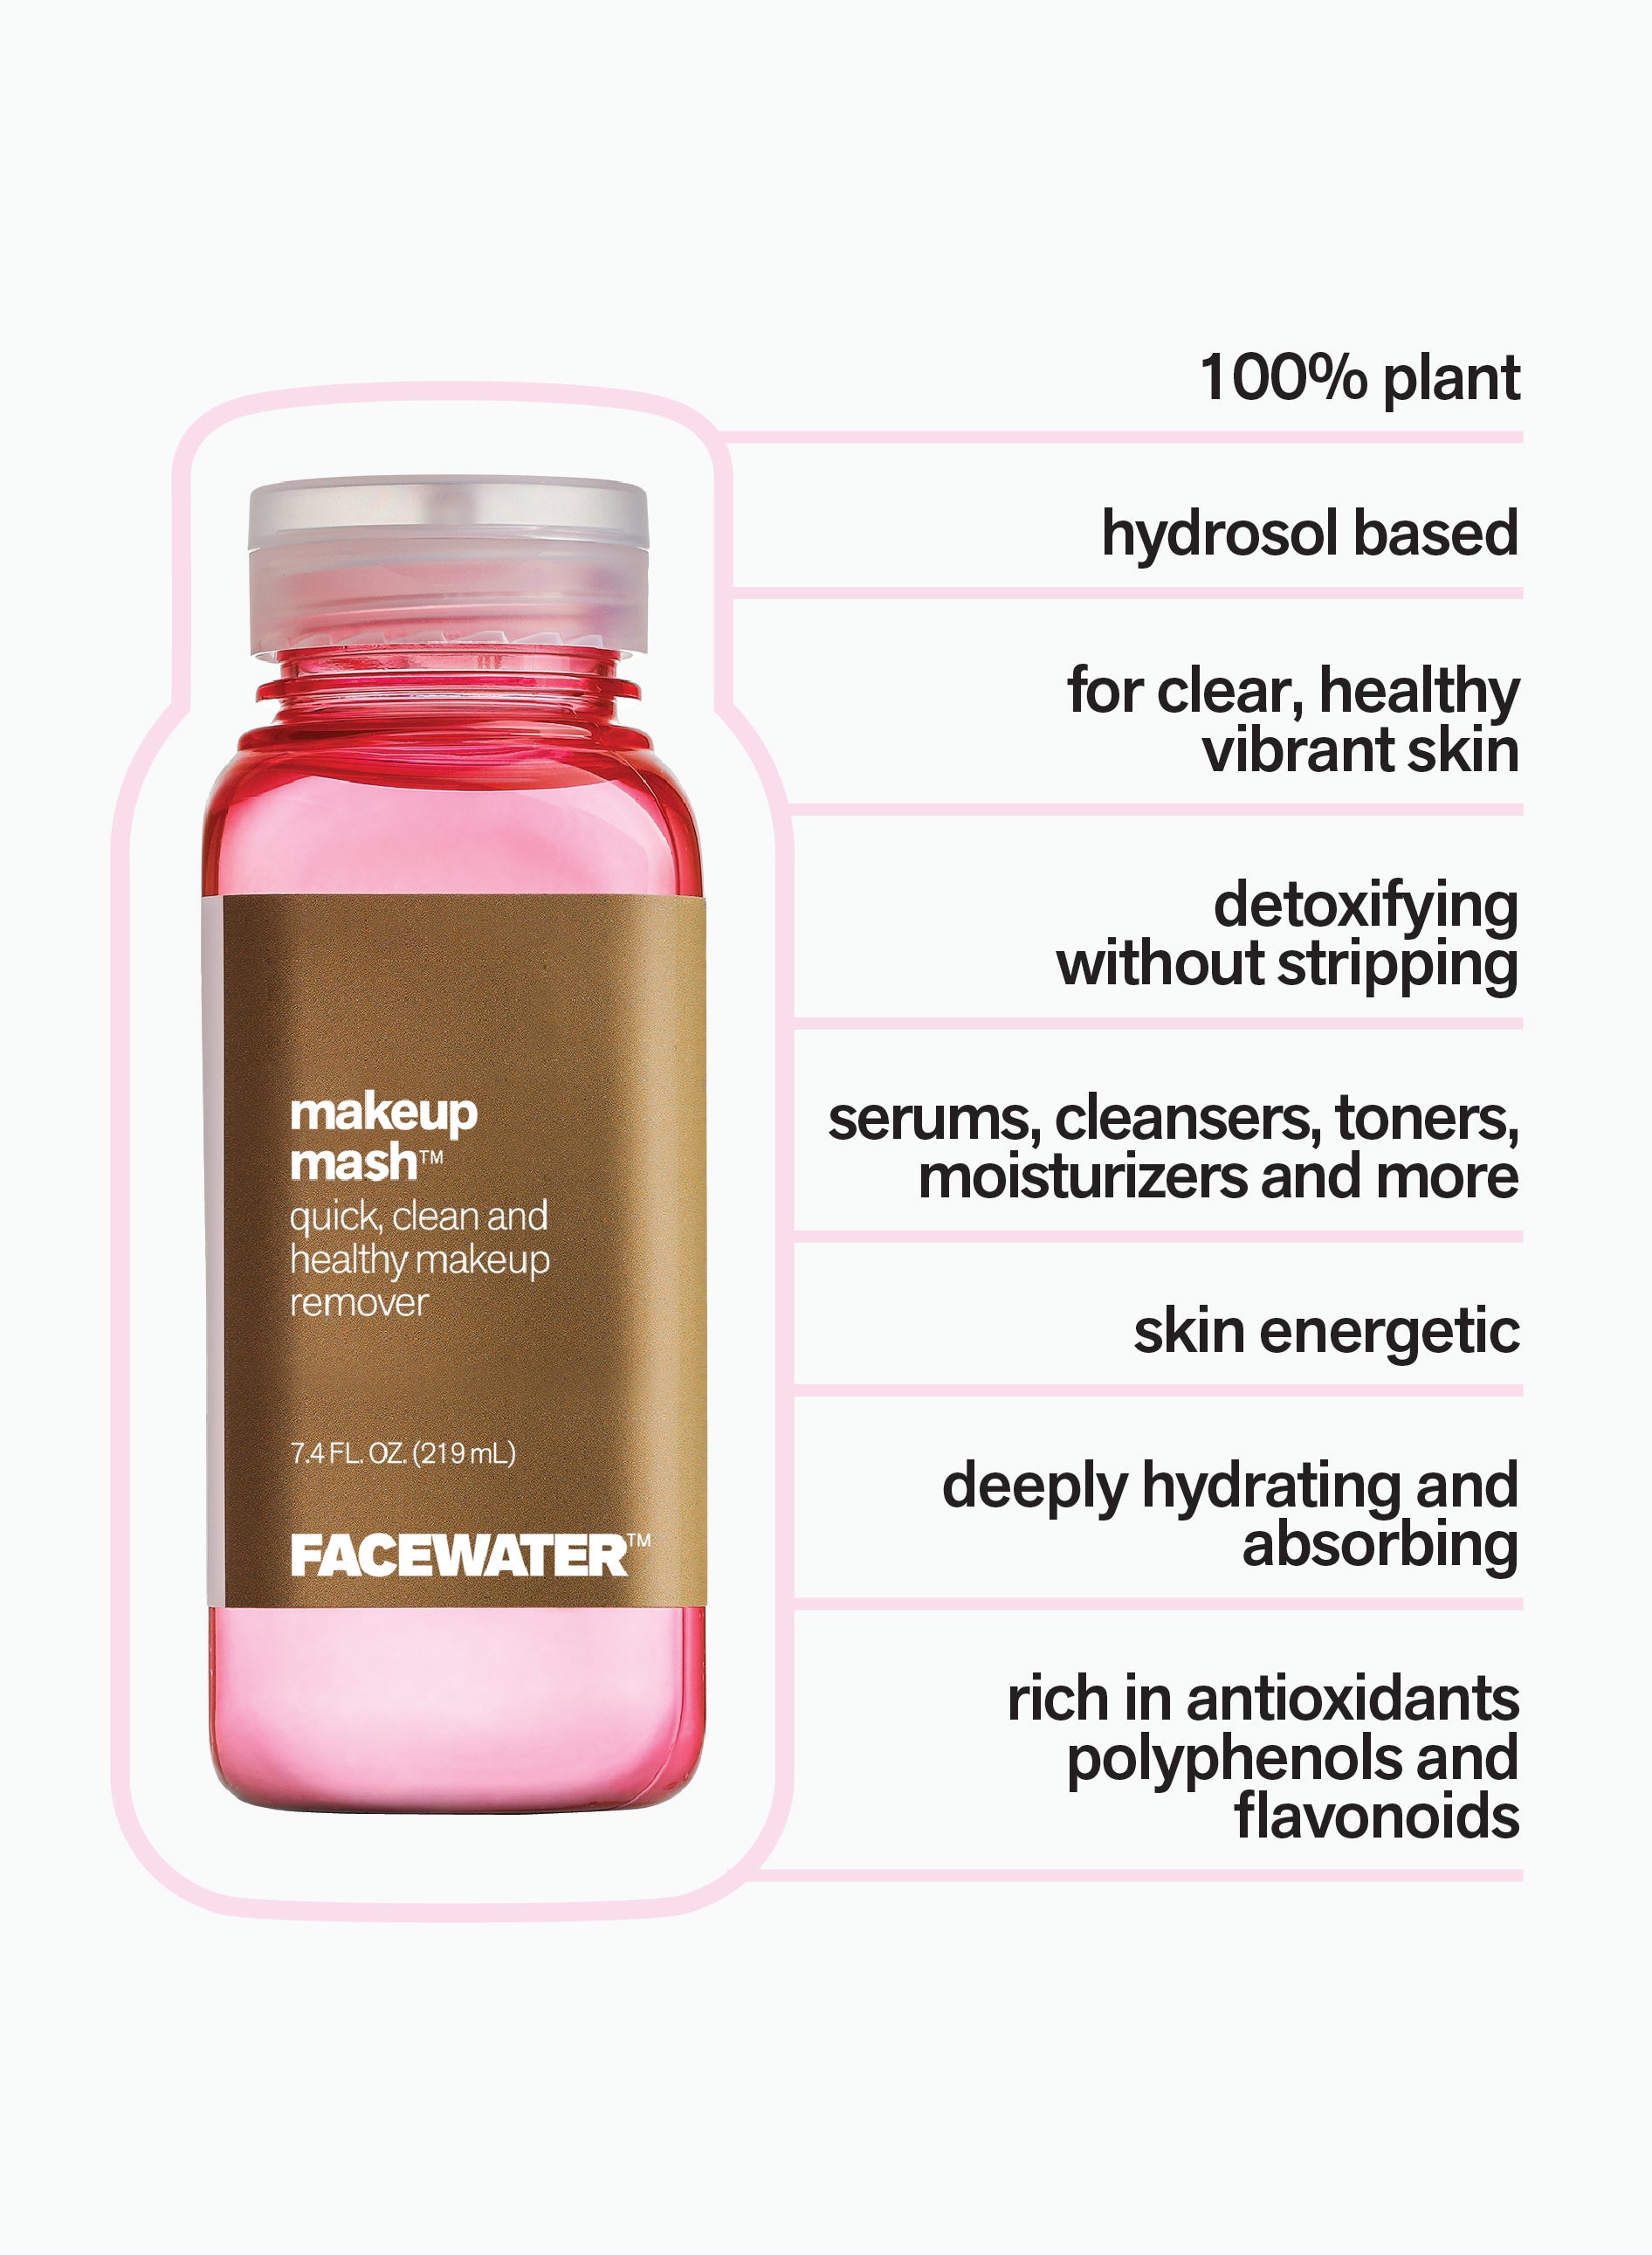 facewater_Info_graphic_mobile_6-6-23.jpg